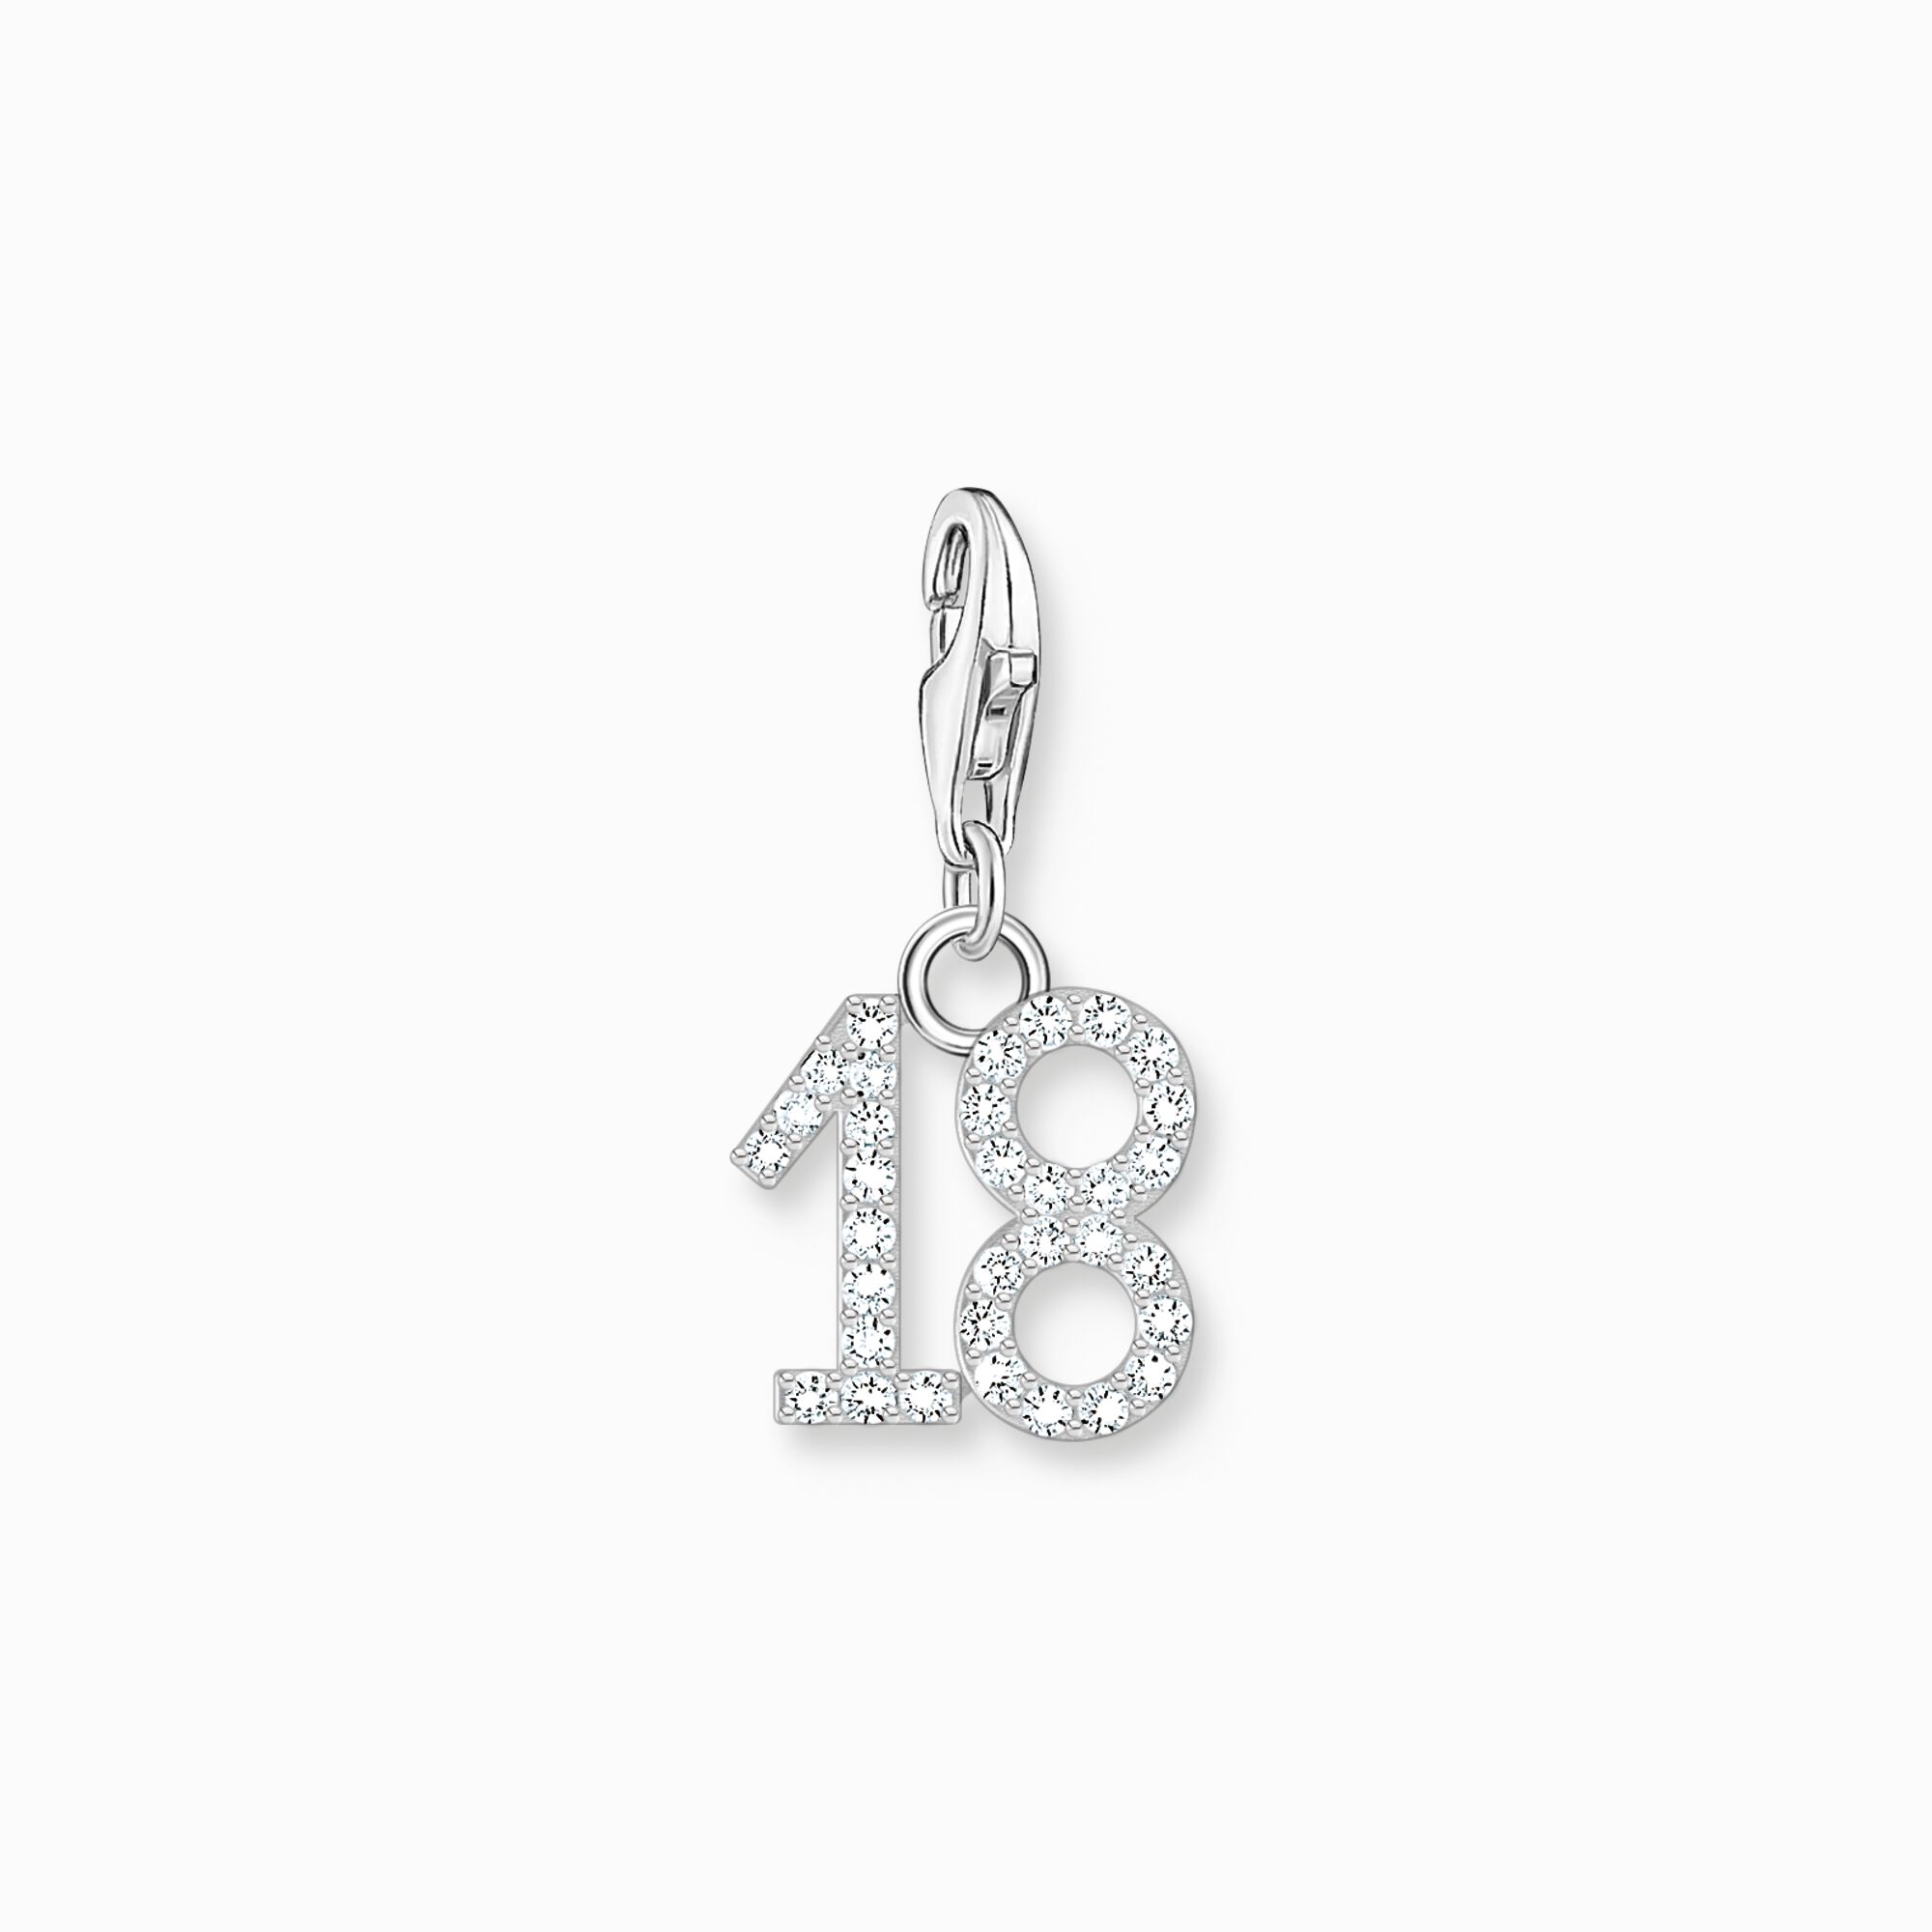 Silver charm pendant number 18 with zirconia from the Charm Club collection in the THOMAS SABO online store